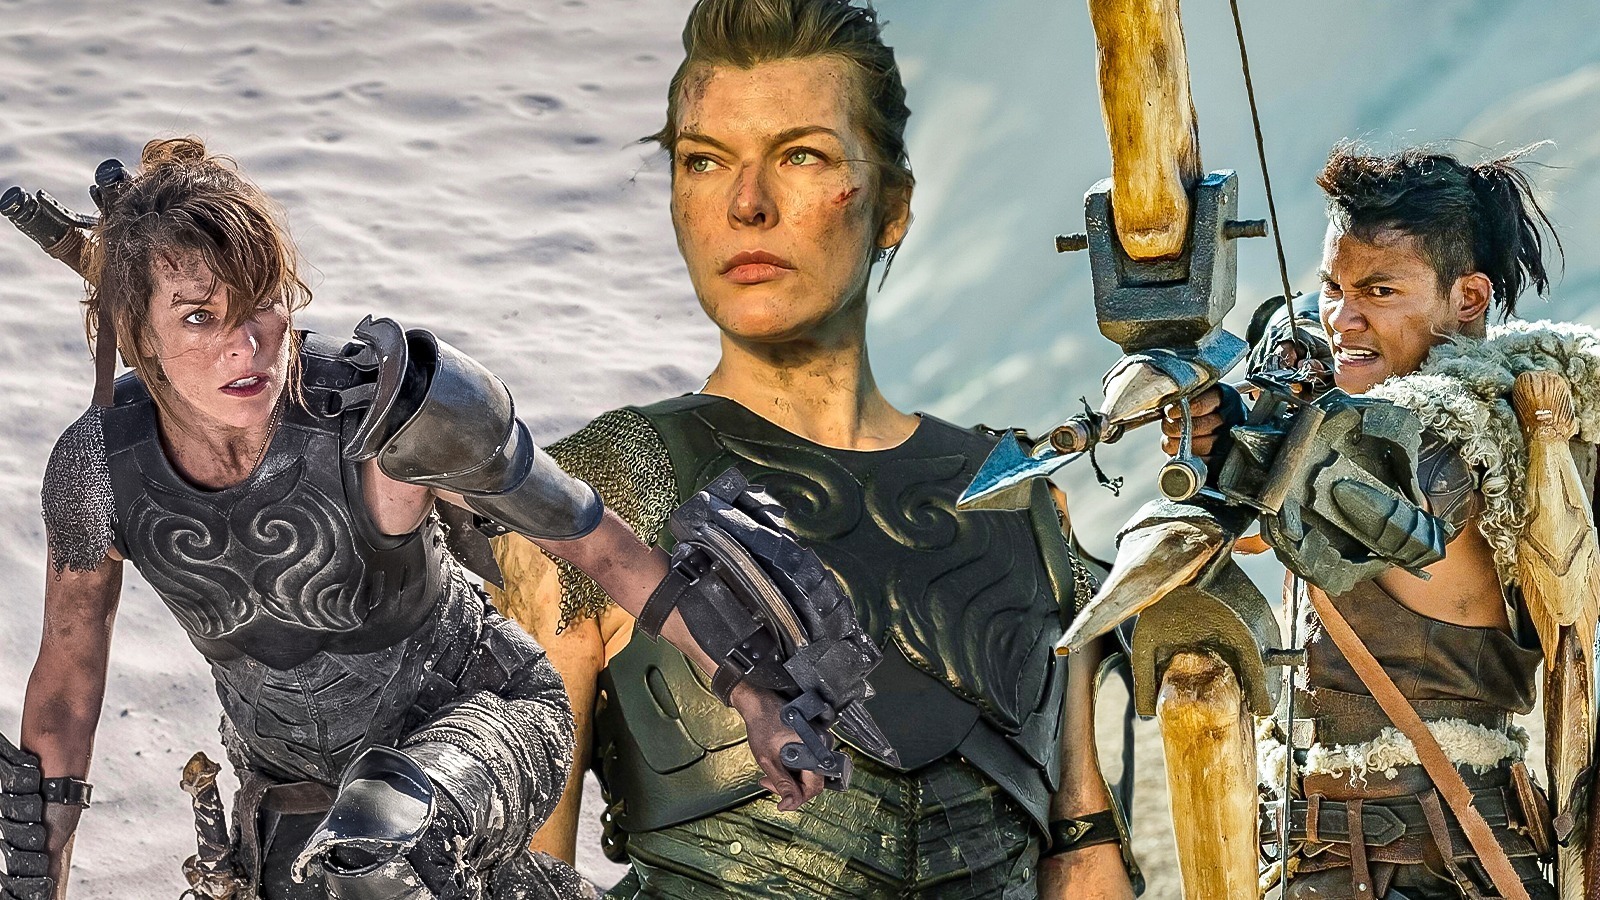 Milla Jovovich's Monster Hunter movie character being added to game